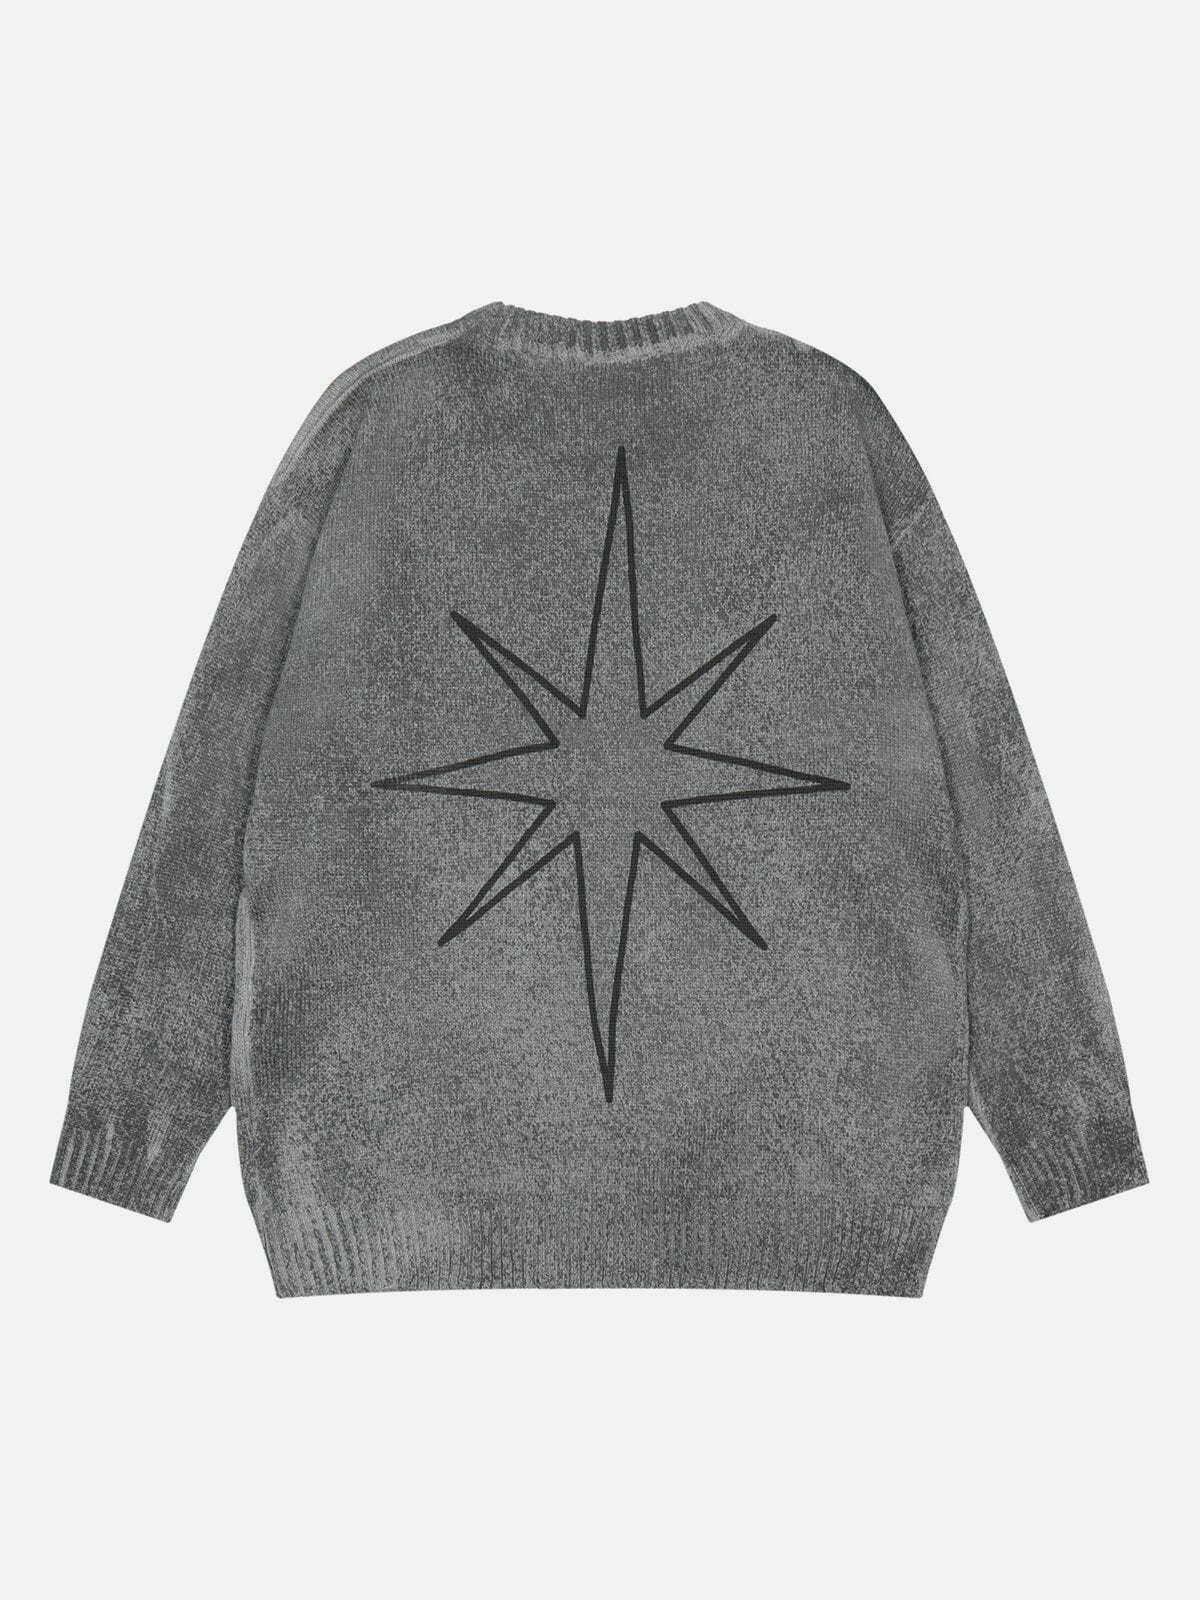 sepia star sweater vintage chic & edgy vibe 3958